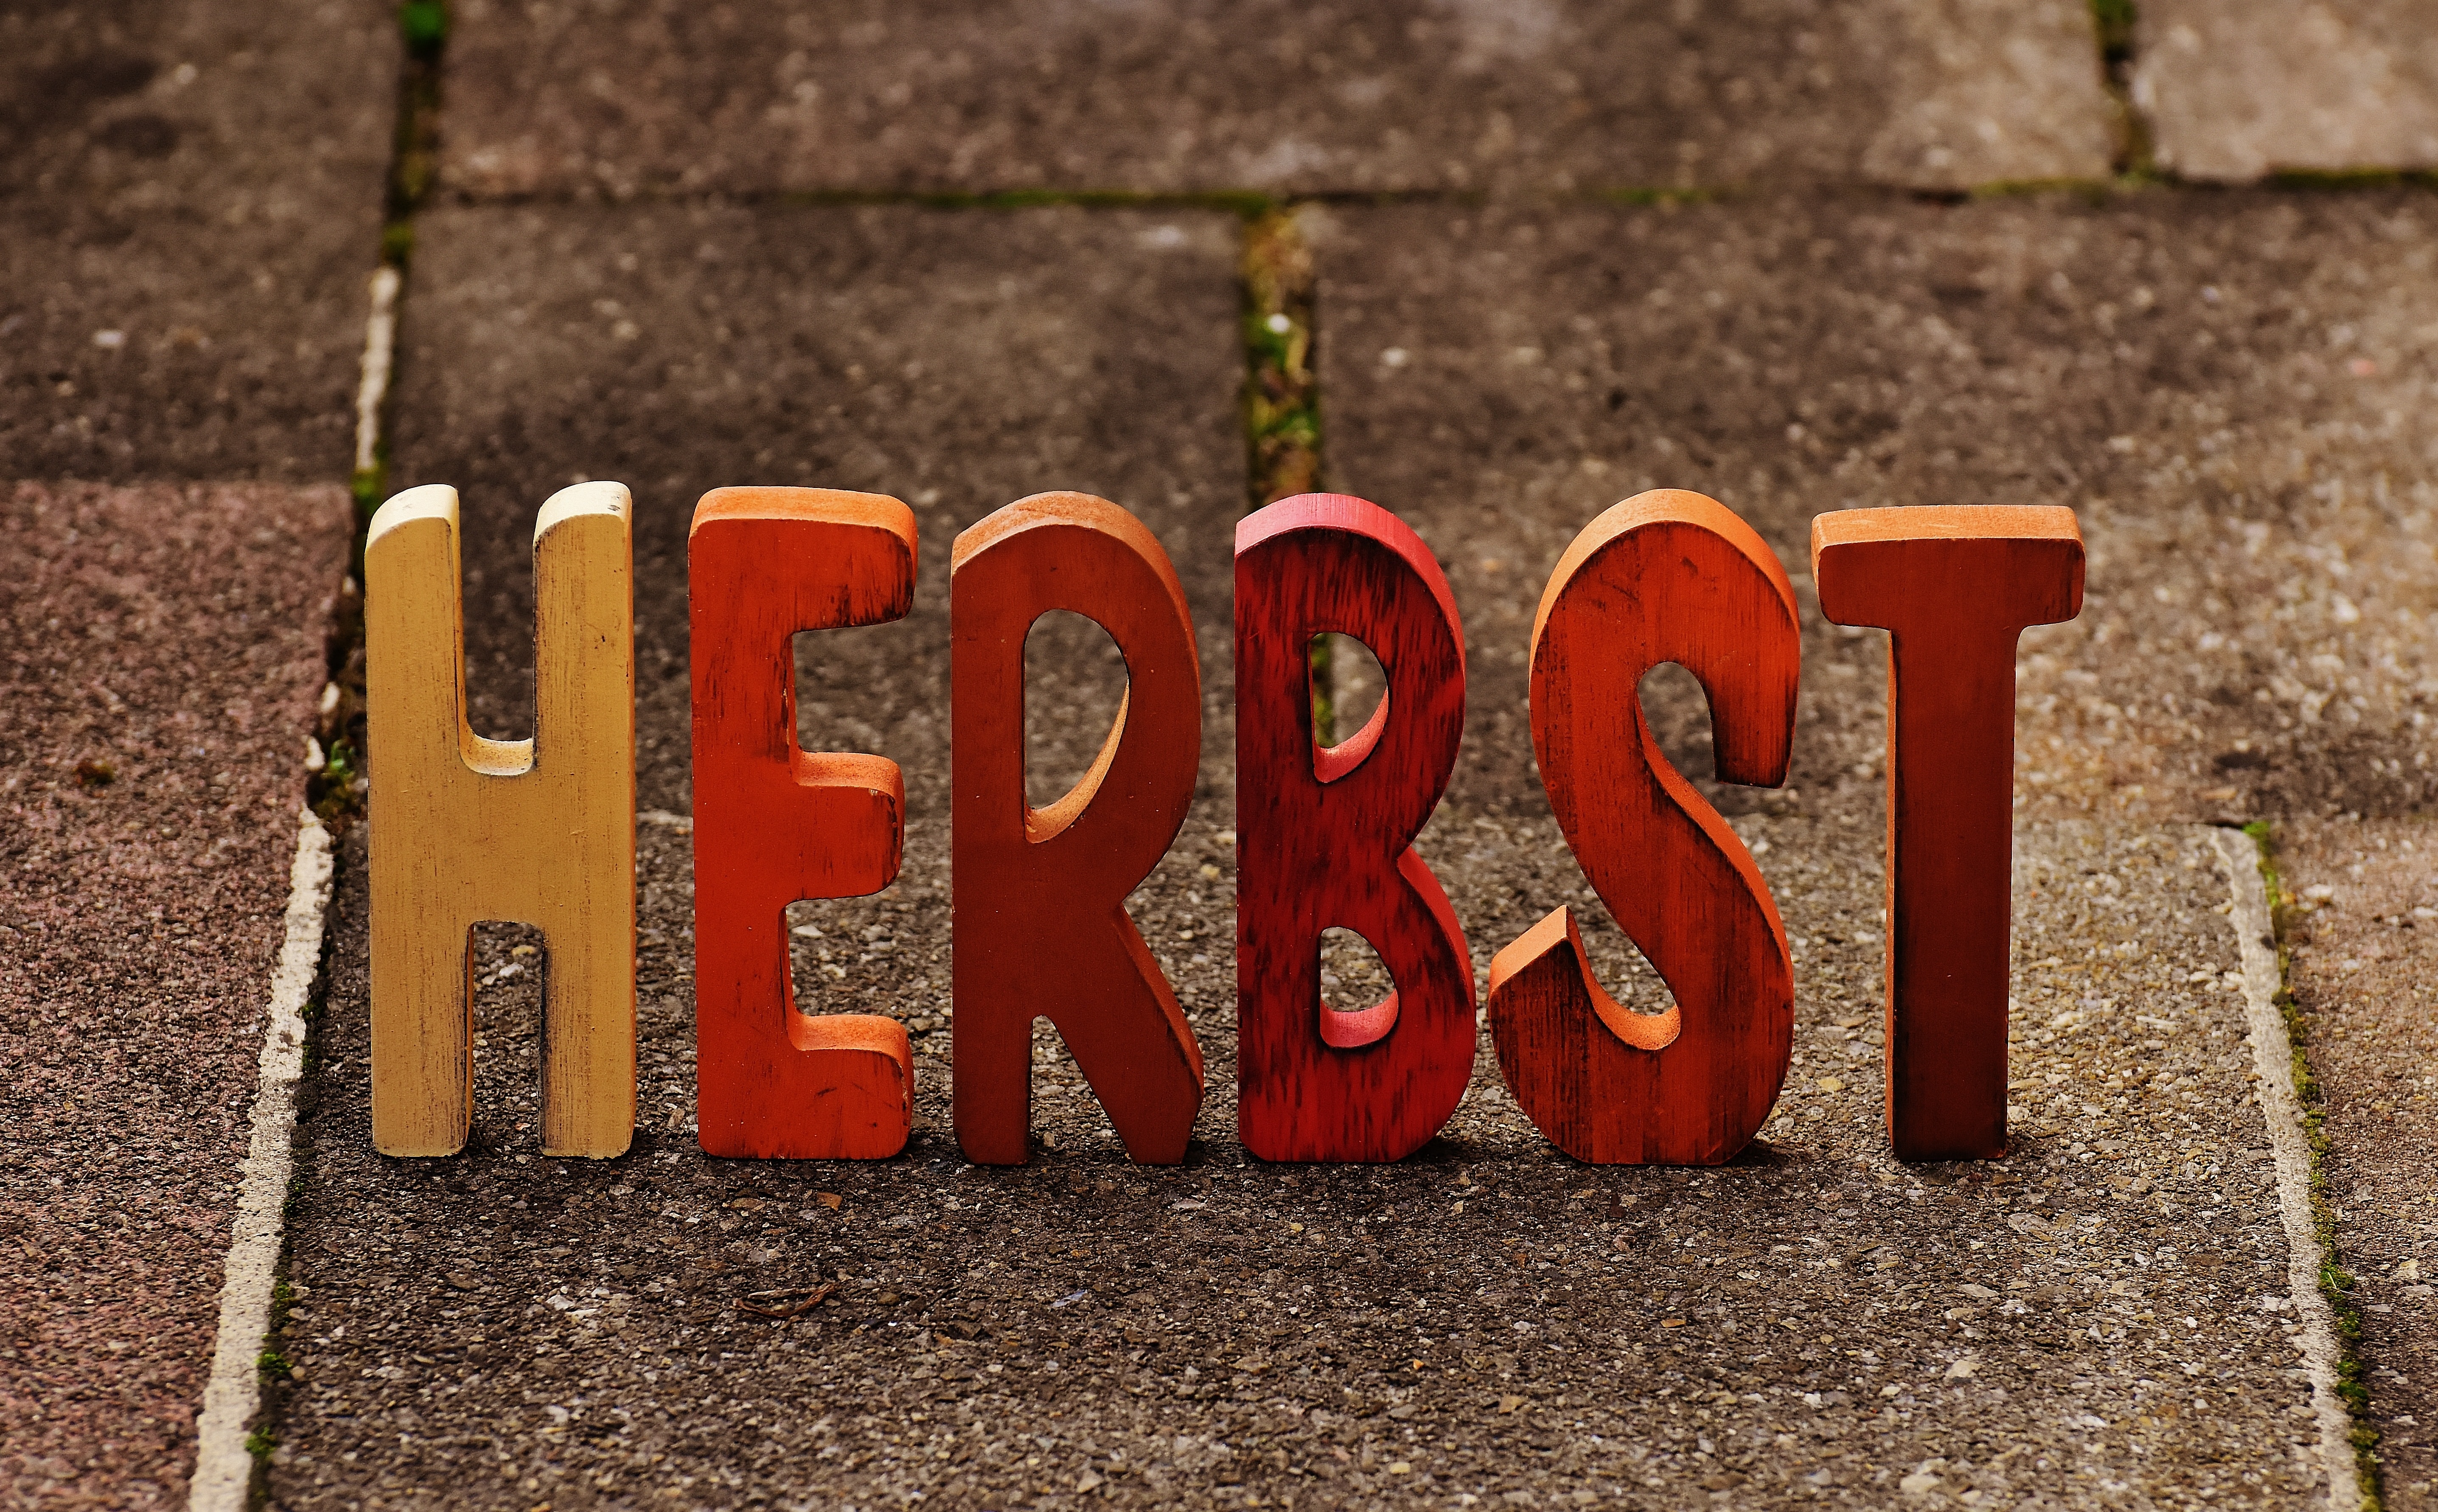 close-up photo of red and brown Herbst text decor placed on gray cinder during daytime